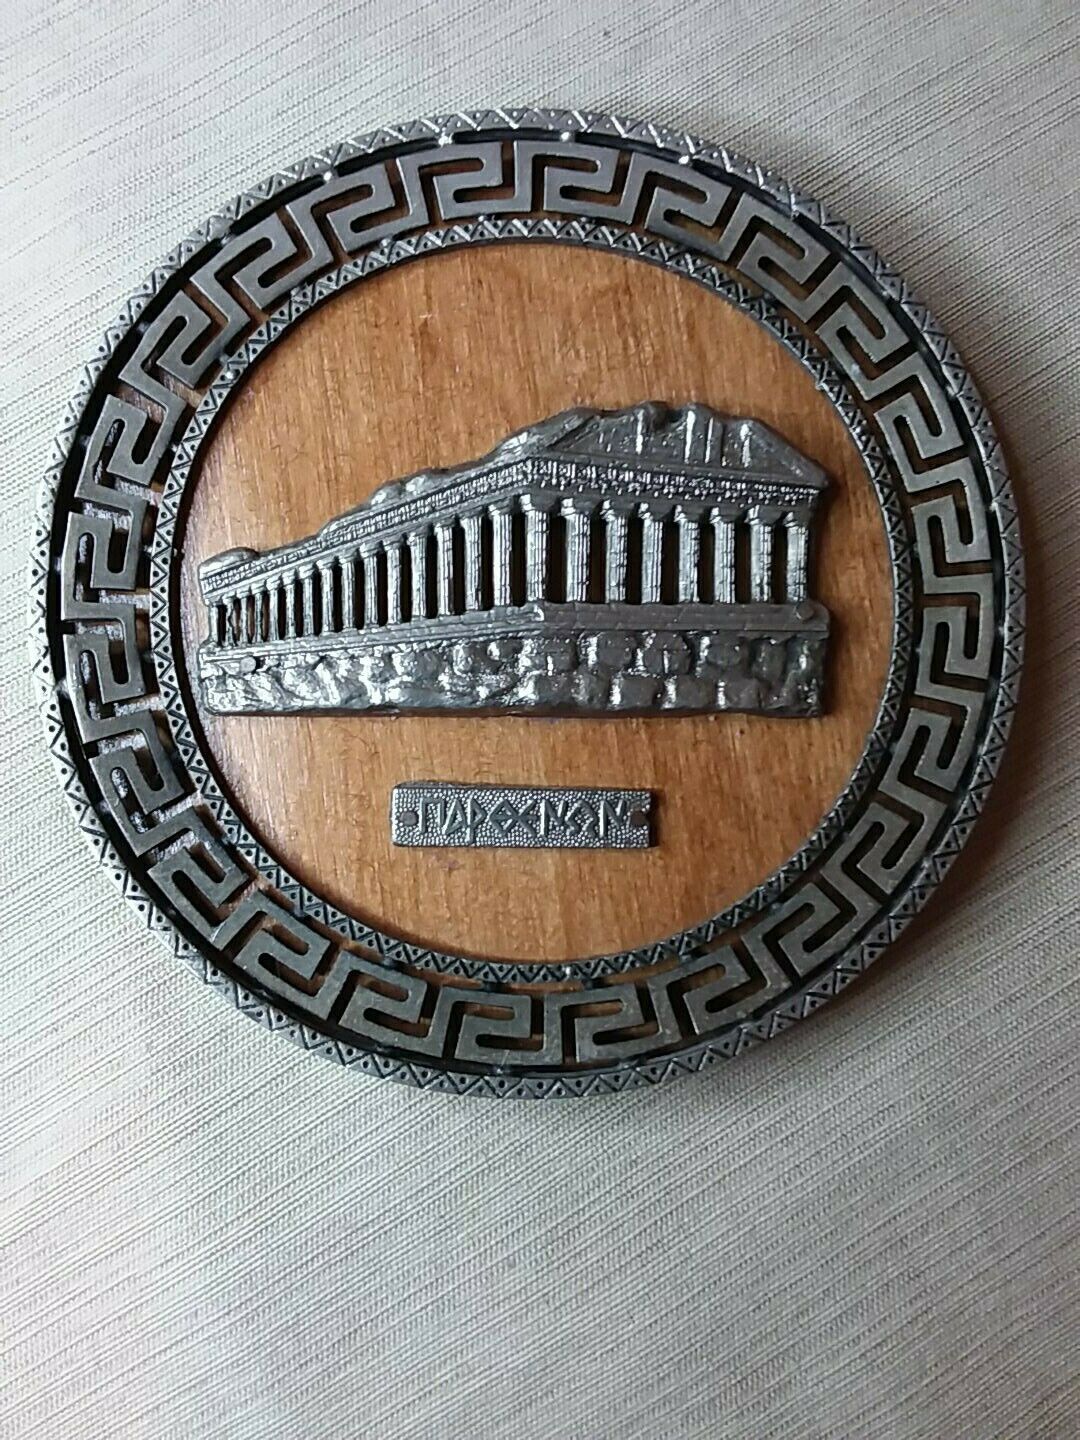 vintage parthenon acropolis ancient wall plaque. Metal and wood handmade